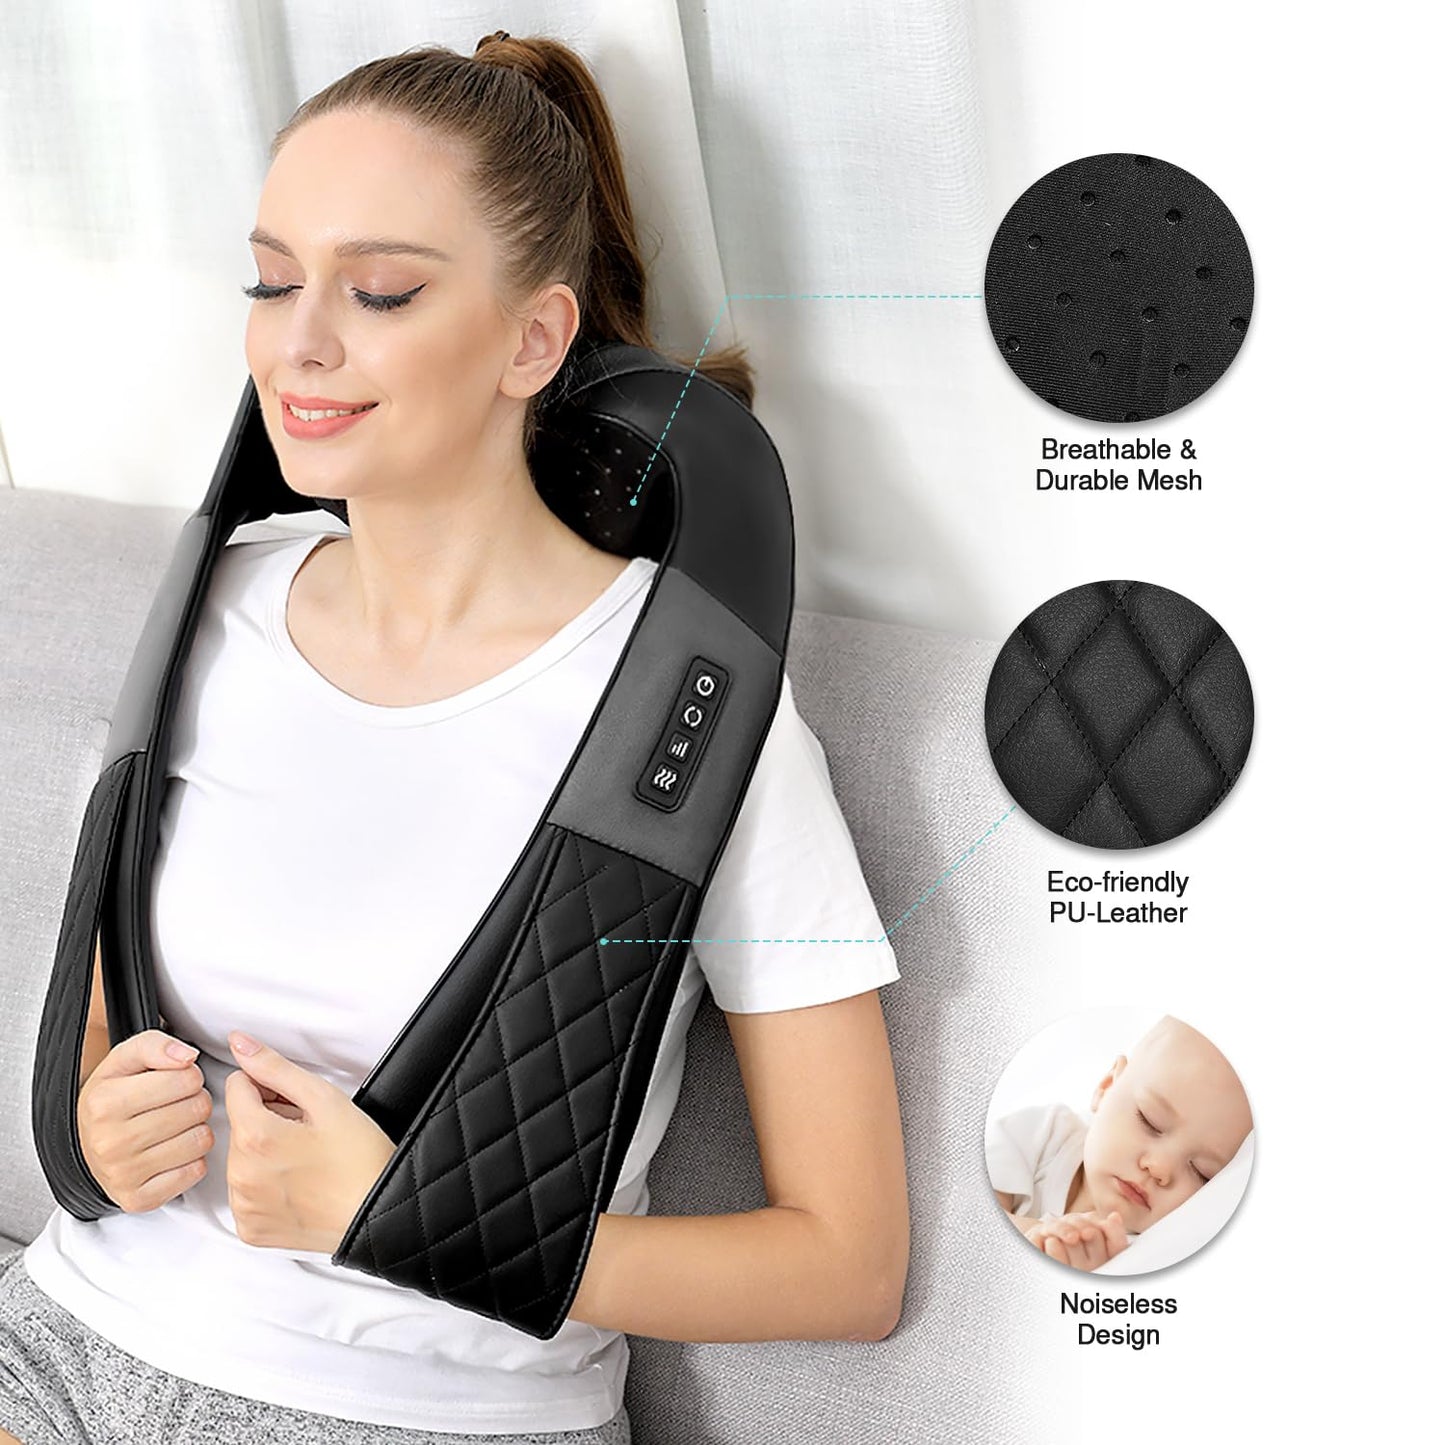 WOQQW Shiatsu Back Neck and Shoulder Massager with Heat - Gifts for Women/Men/Mom/Dad - Electric Deep Tissue 4D Kneading Massager Gifts for Valentine, Mother's Day, Father's Day, Birthday